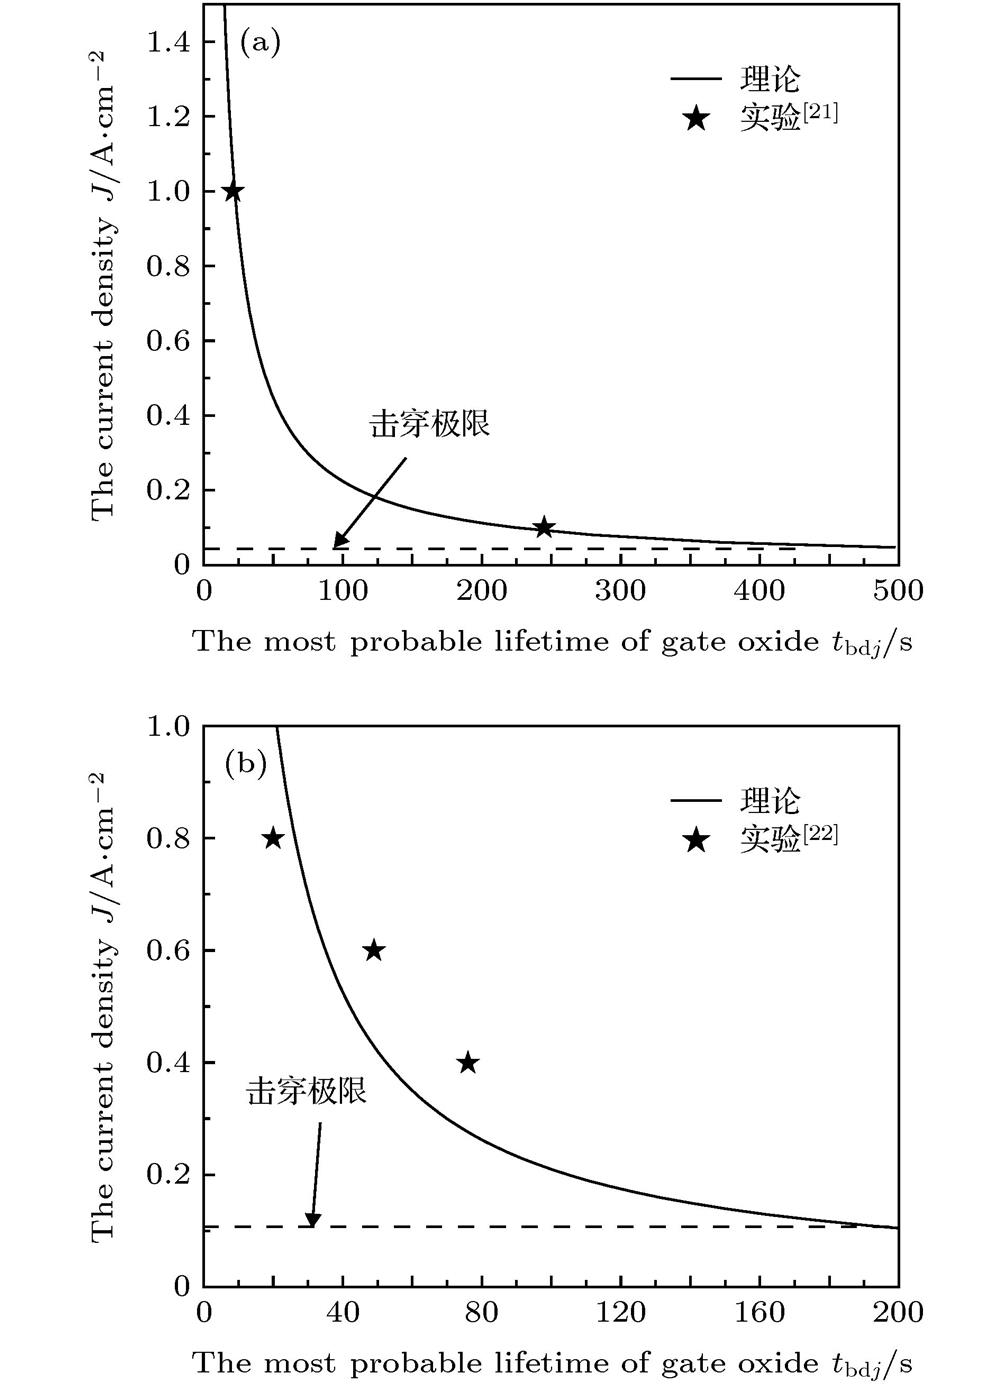 The most probable lifetime of gate oxide under different electric current density: (a) Sample 1; (b) sample 2